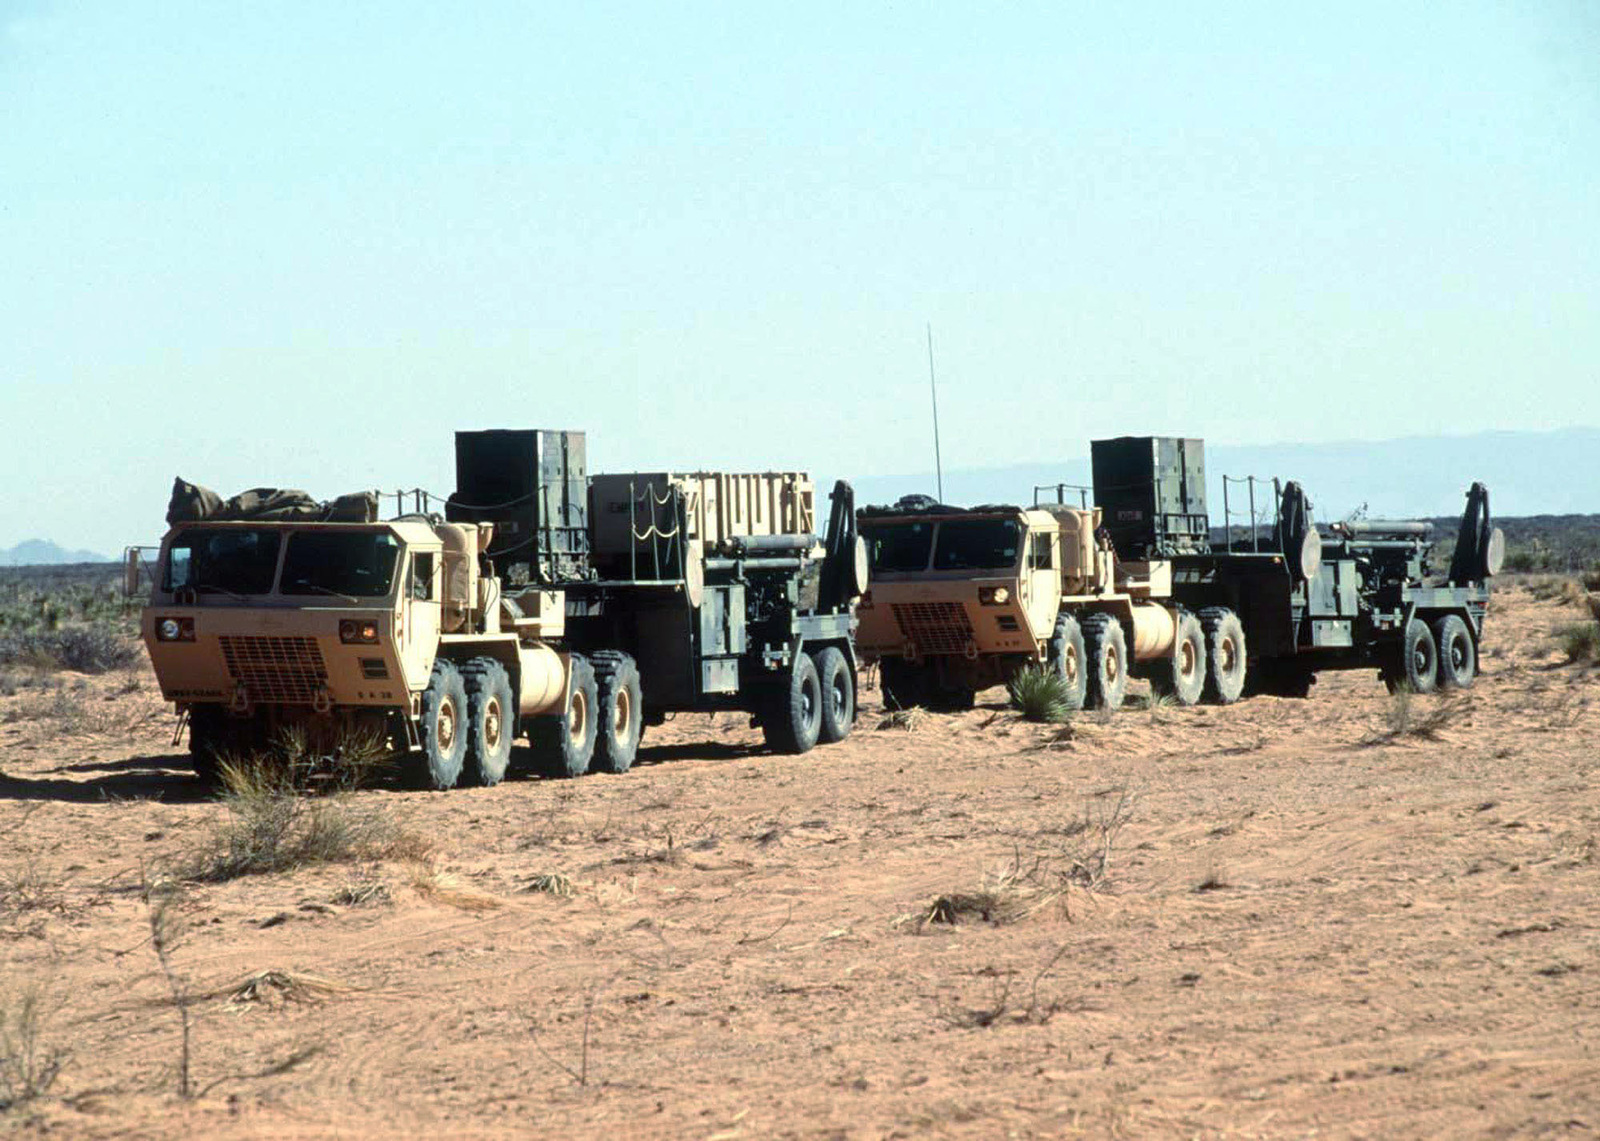 Members Of Alpha 5 52 Air Defense Artillery Brigade Fort Bliss Texas Drive Their Patriot Missile